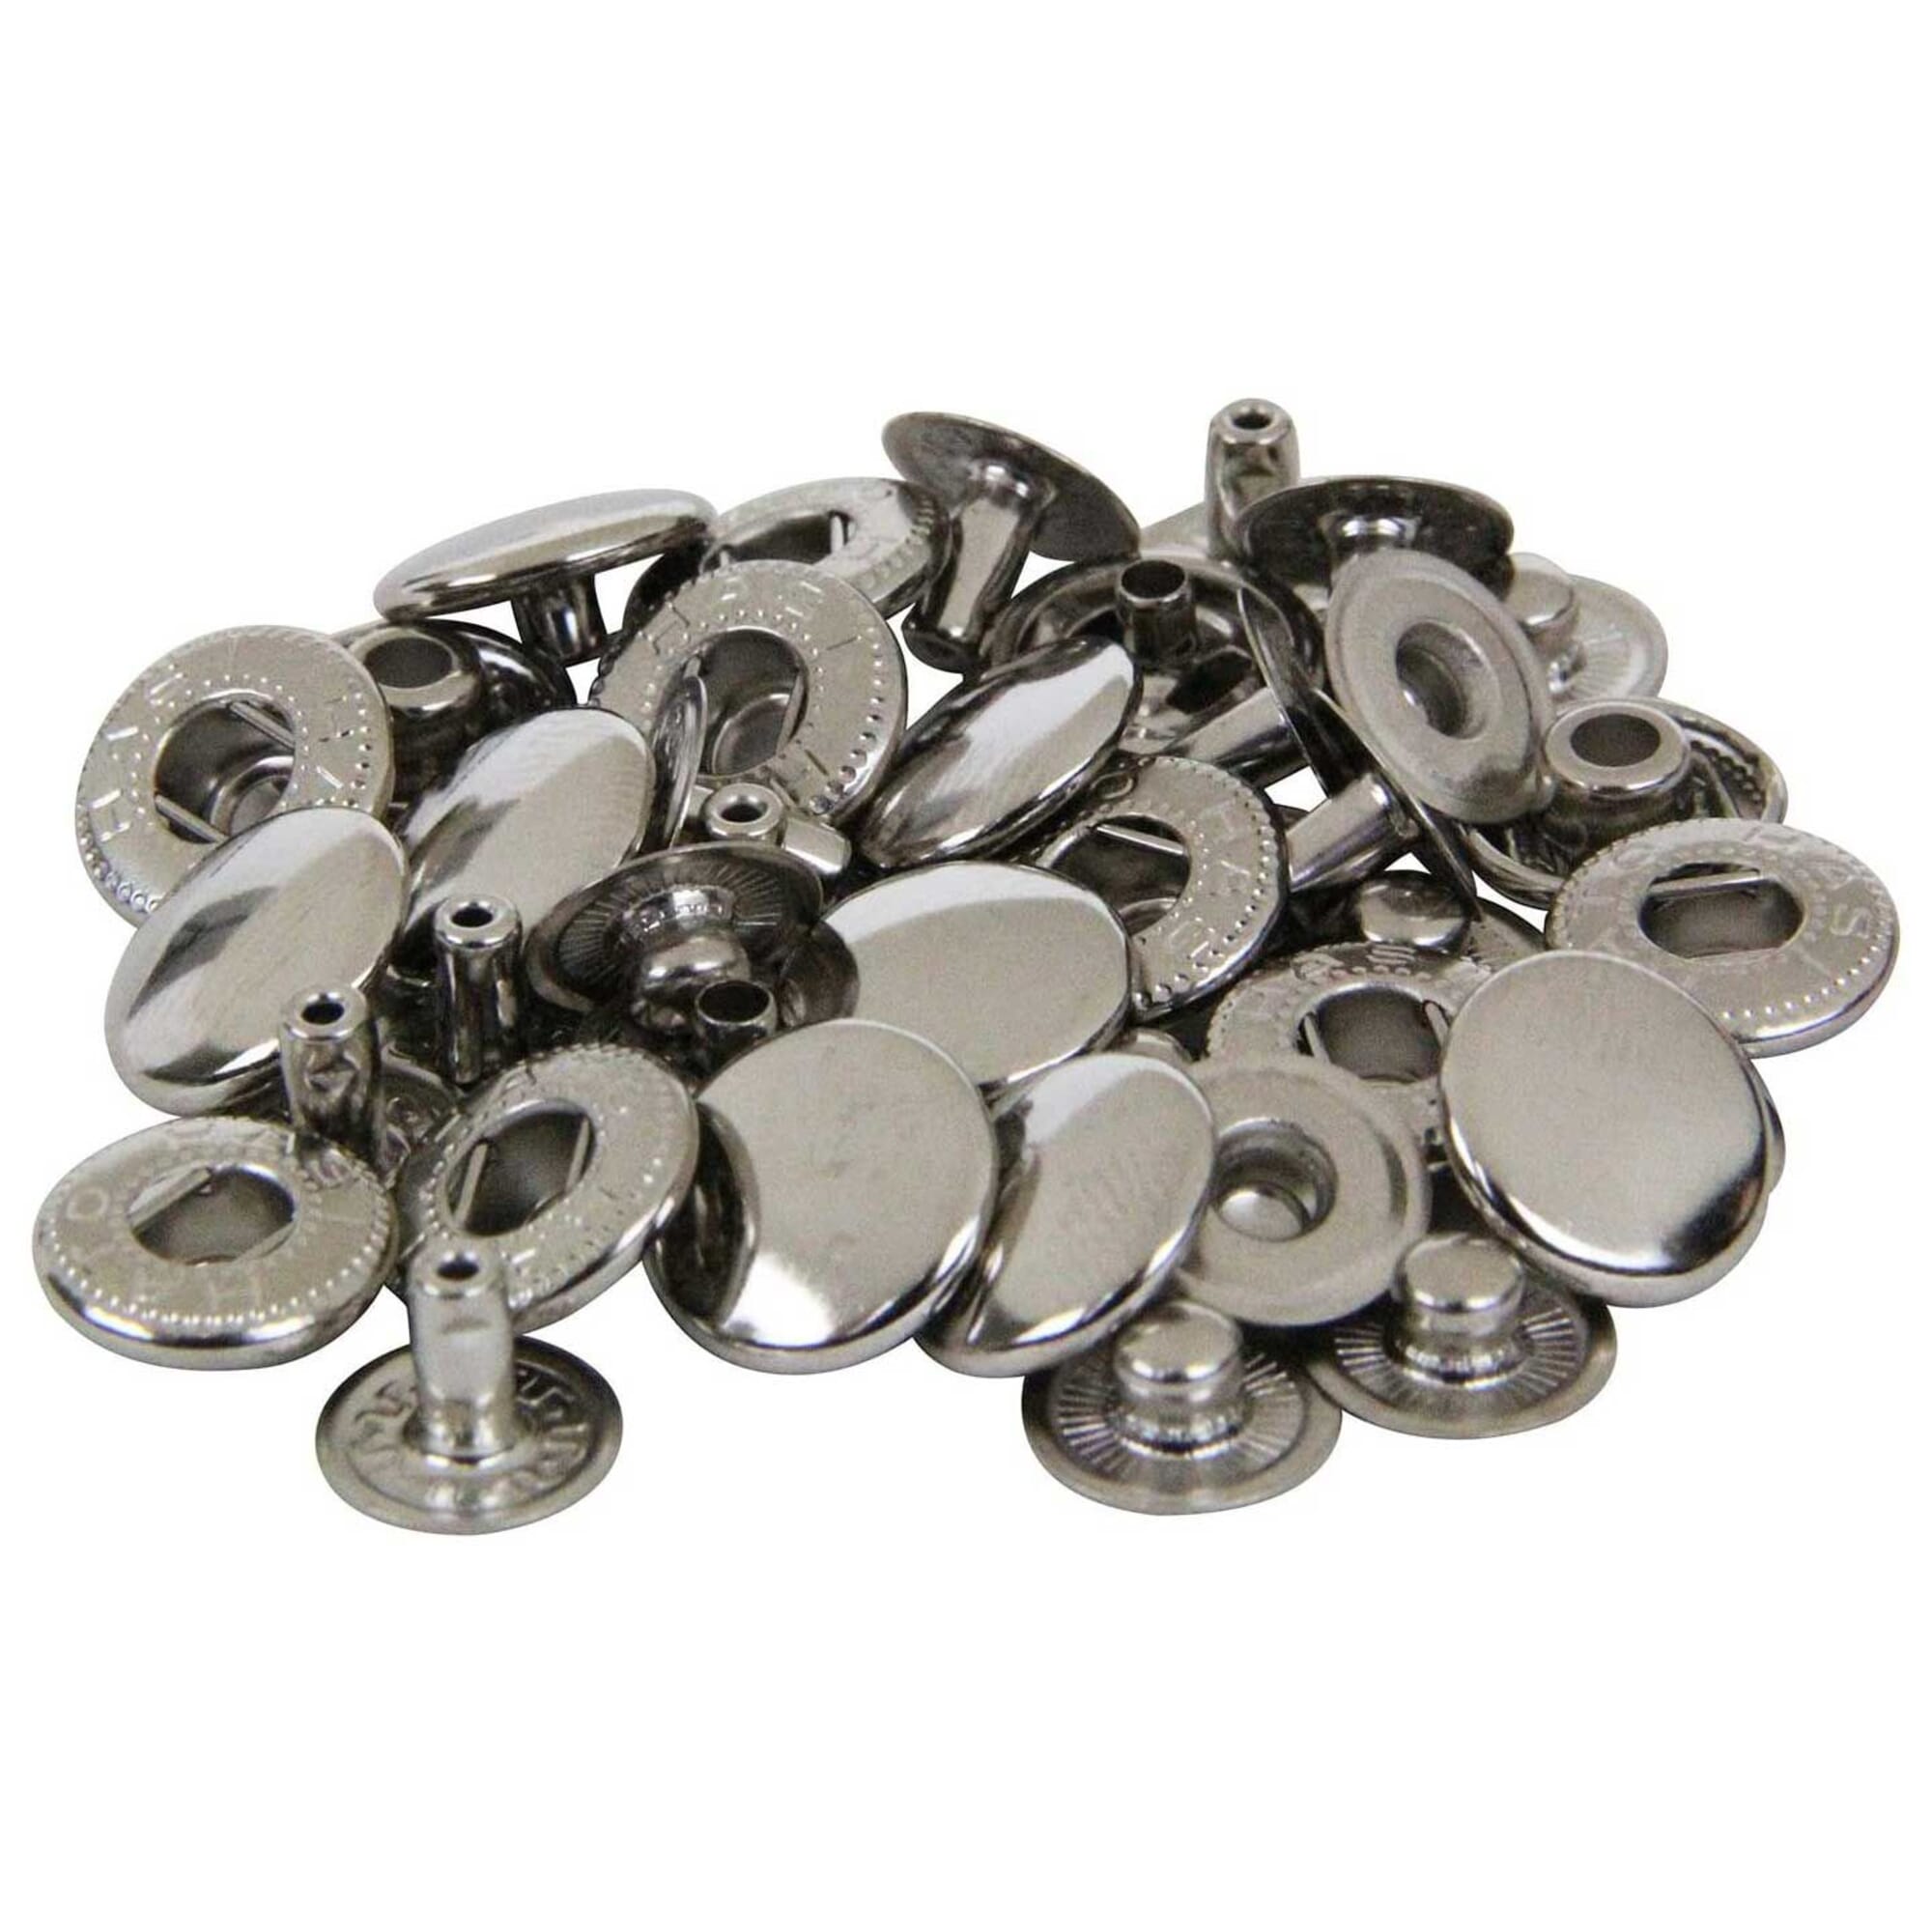 10 Sets 4 Colors Metal Snap Button Snap Fasteners Clothing Snaps